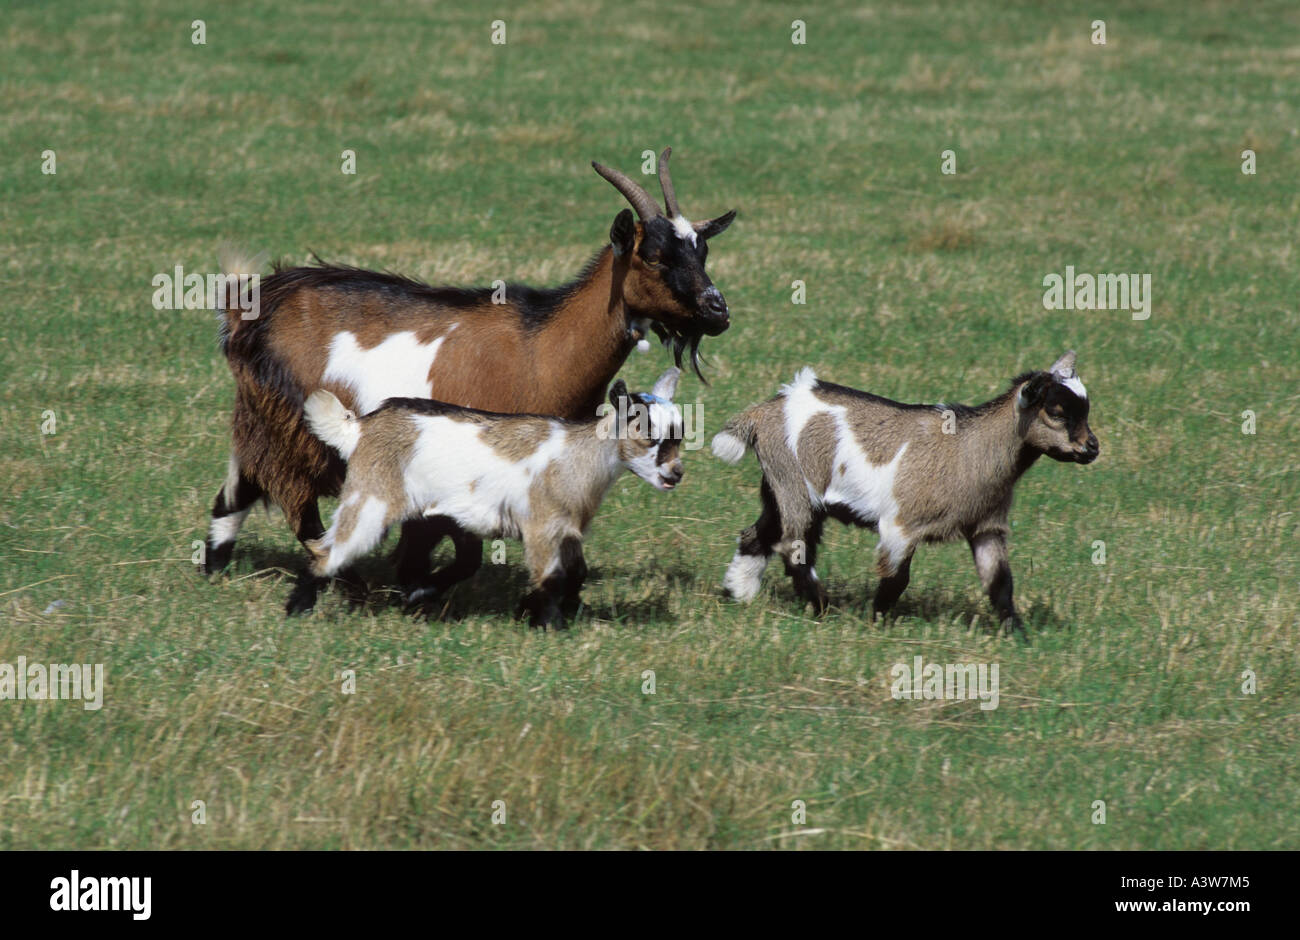 Pygmy goat with kids at grass Stock Photo